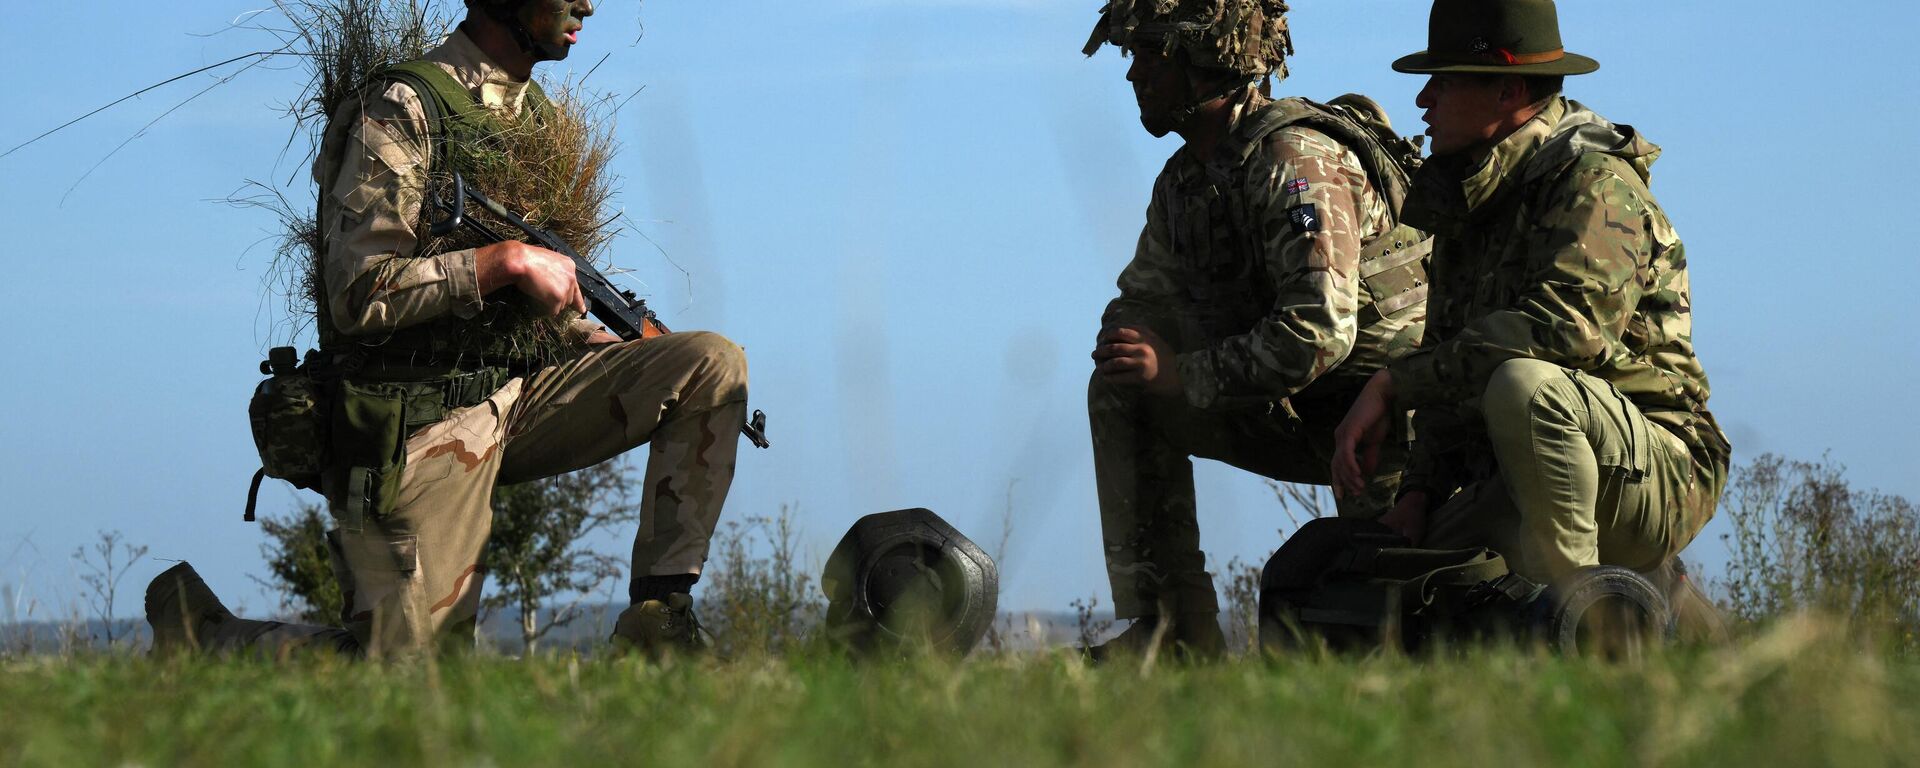 A Ukrainian recruit speaks with instructors during a five-week combat training course with the UK armed forces near Durrington in southern England on October 11, 2022 - Sputnik International, 1920, 23.10.2022